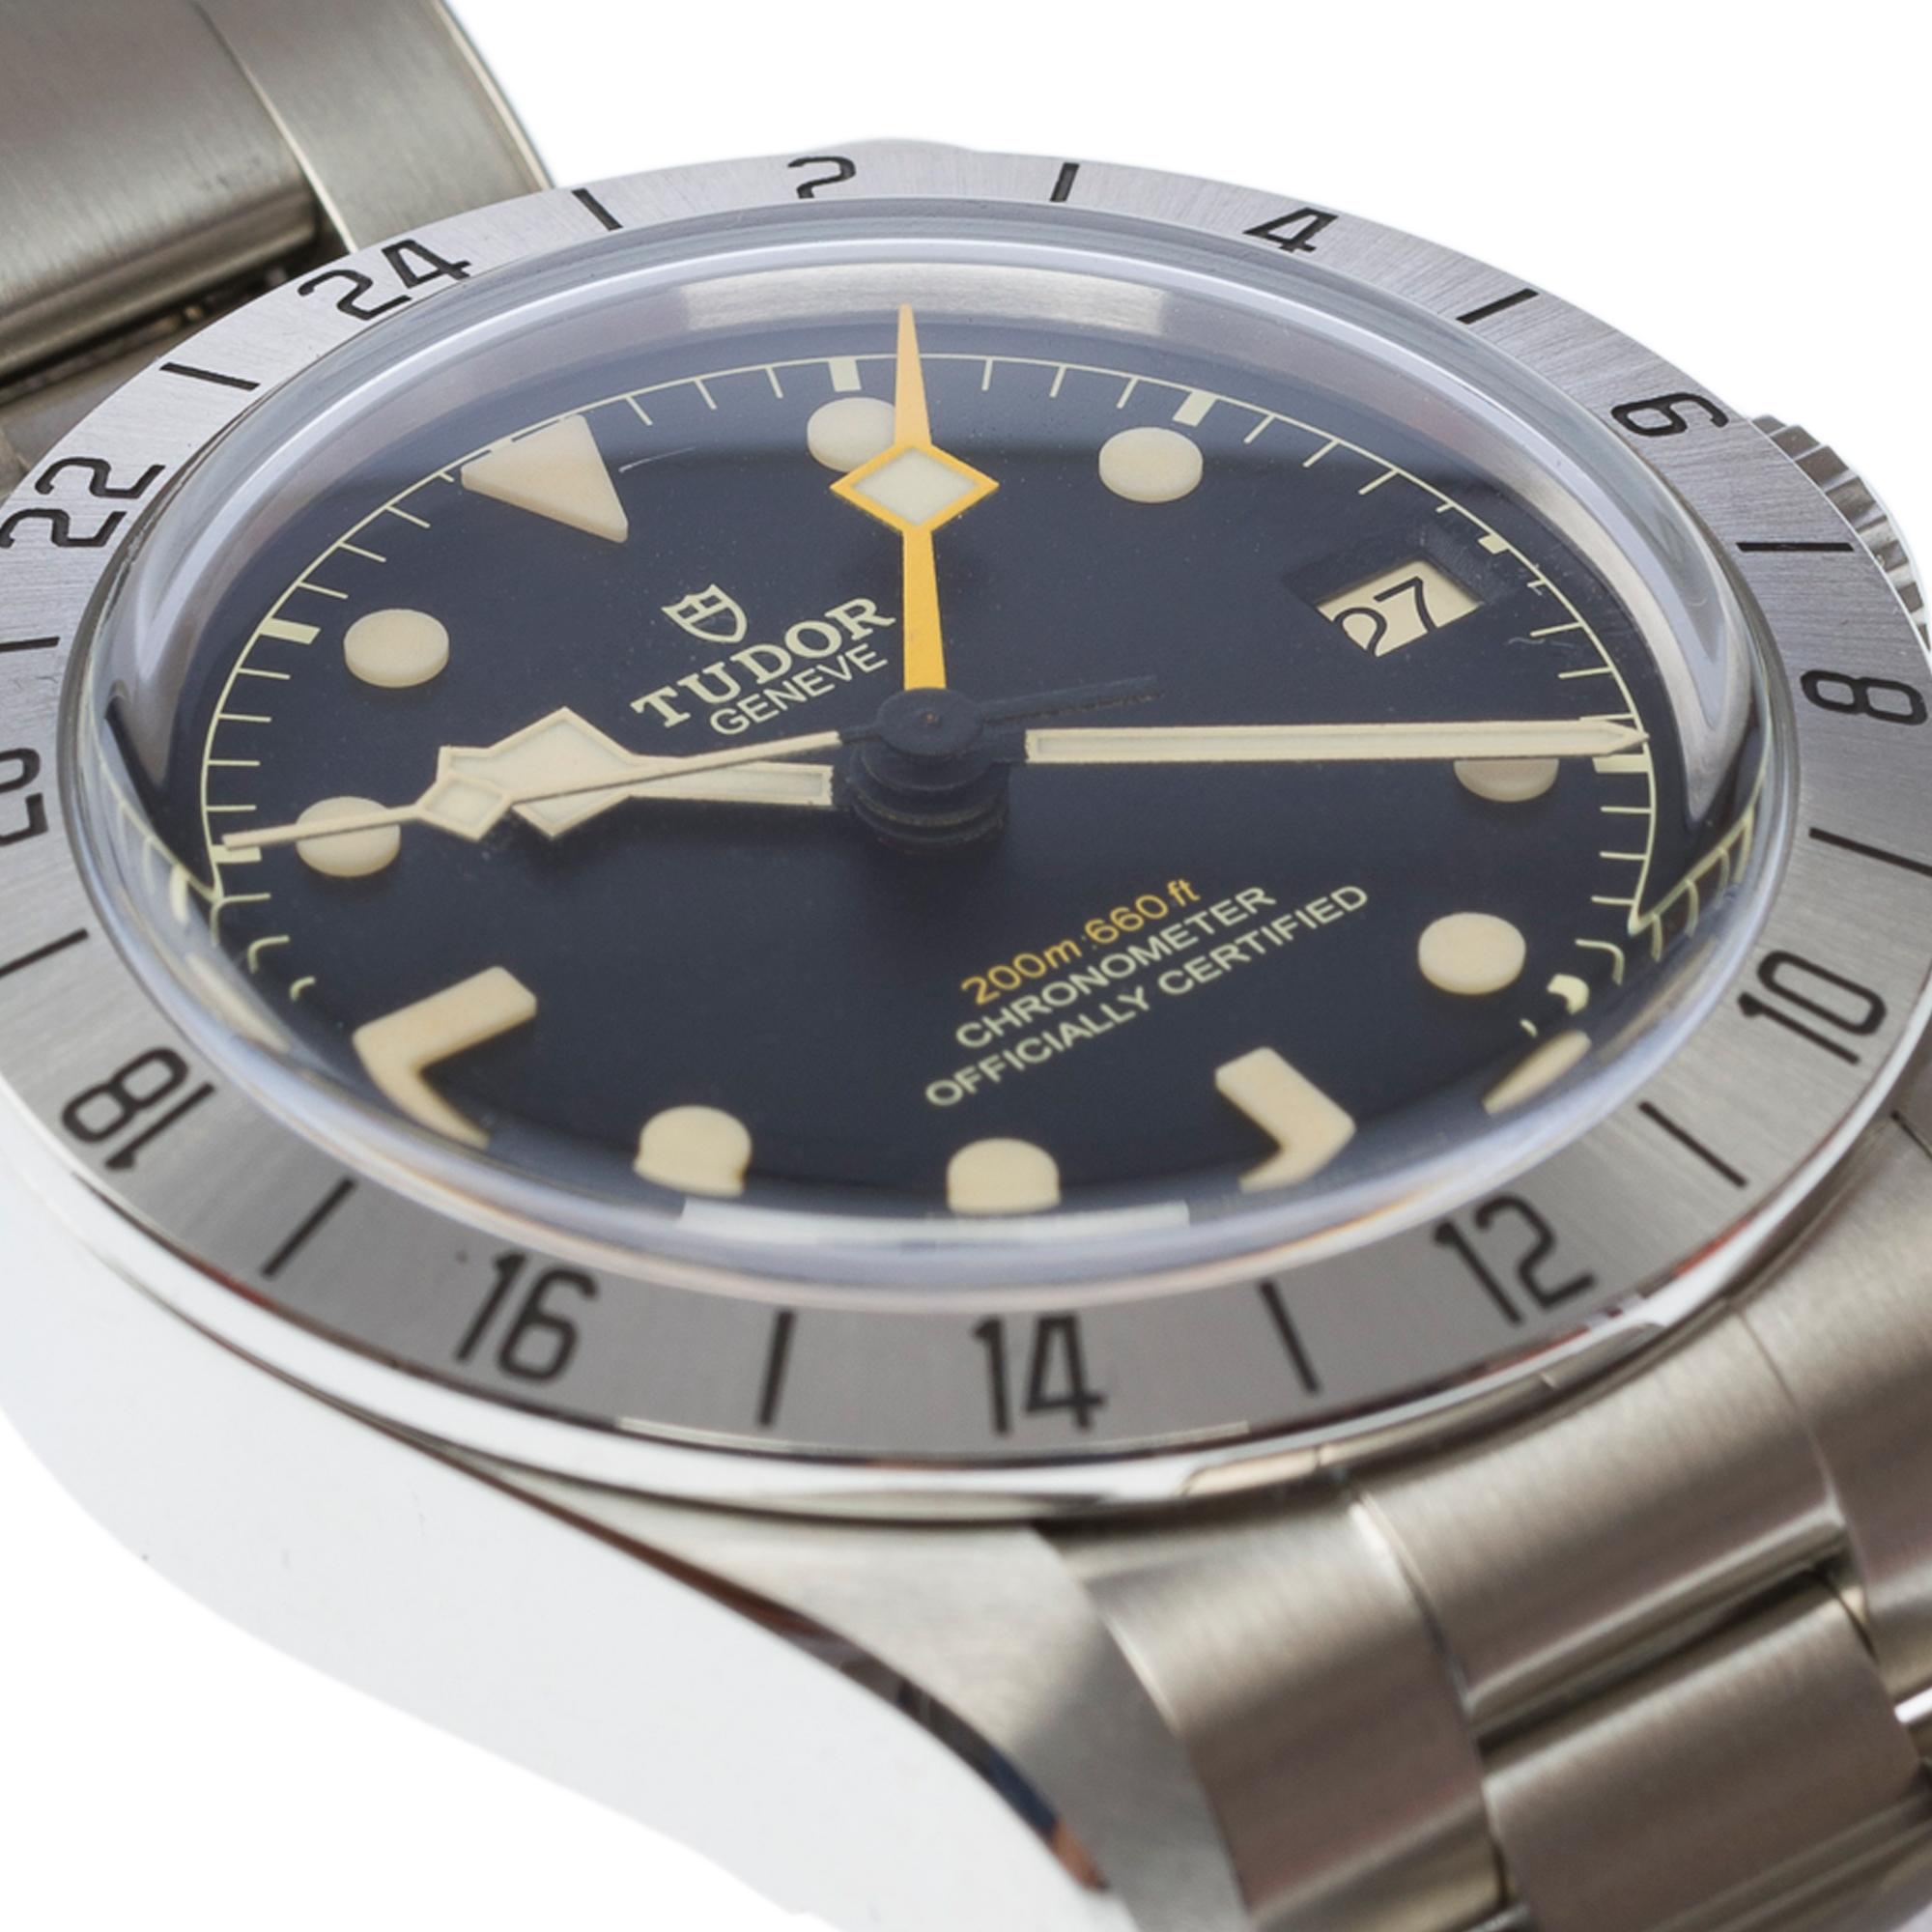 Amazing Tudor Black Bay Pro 39mm Automatic Watch in steel For Sale 2